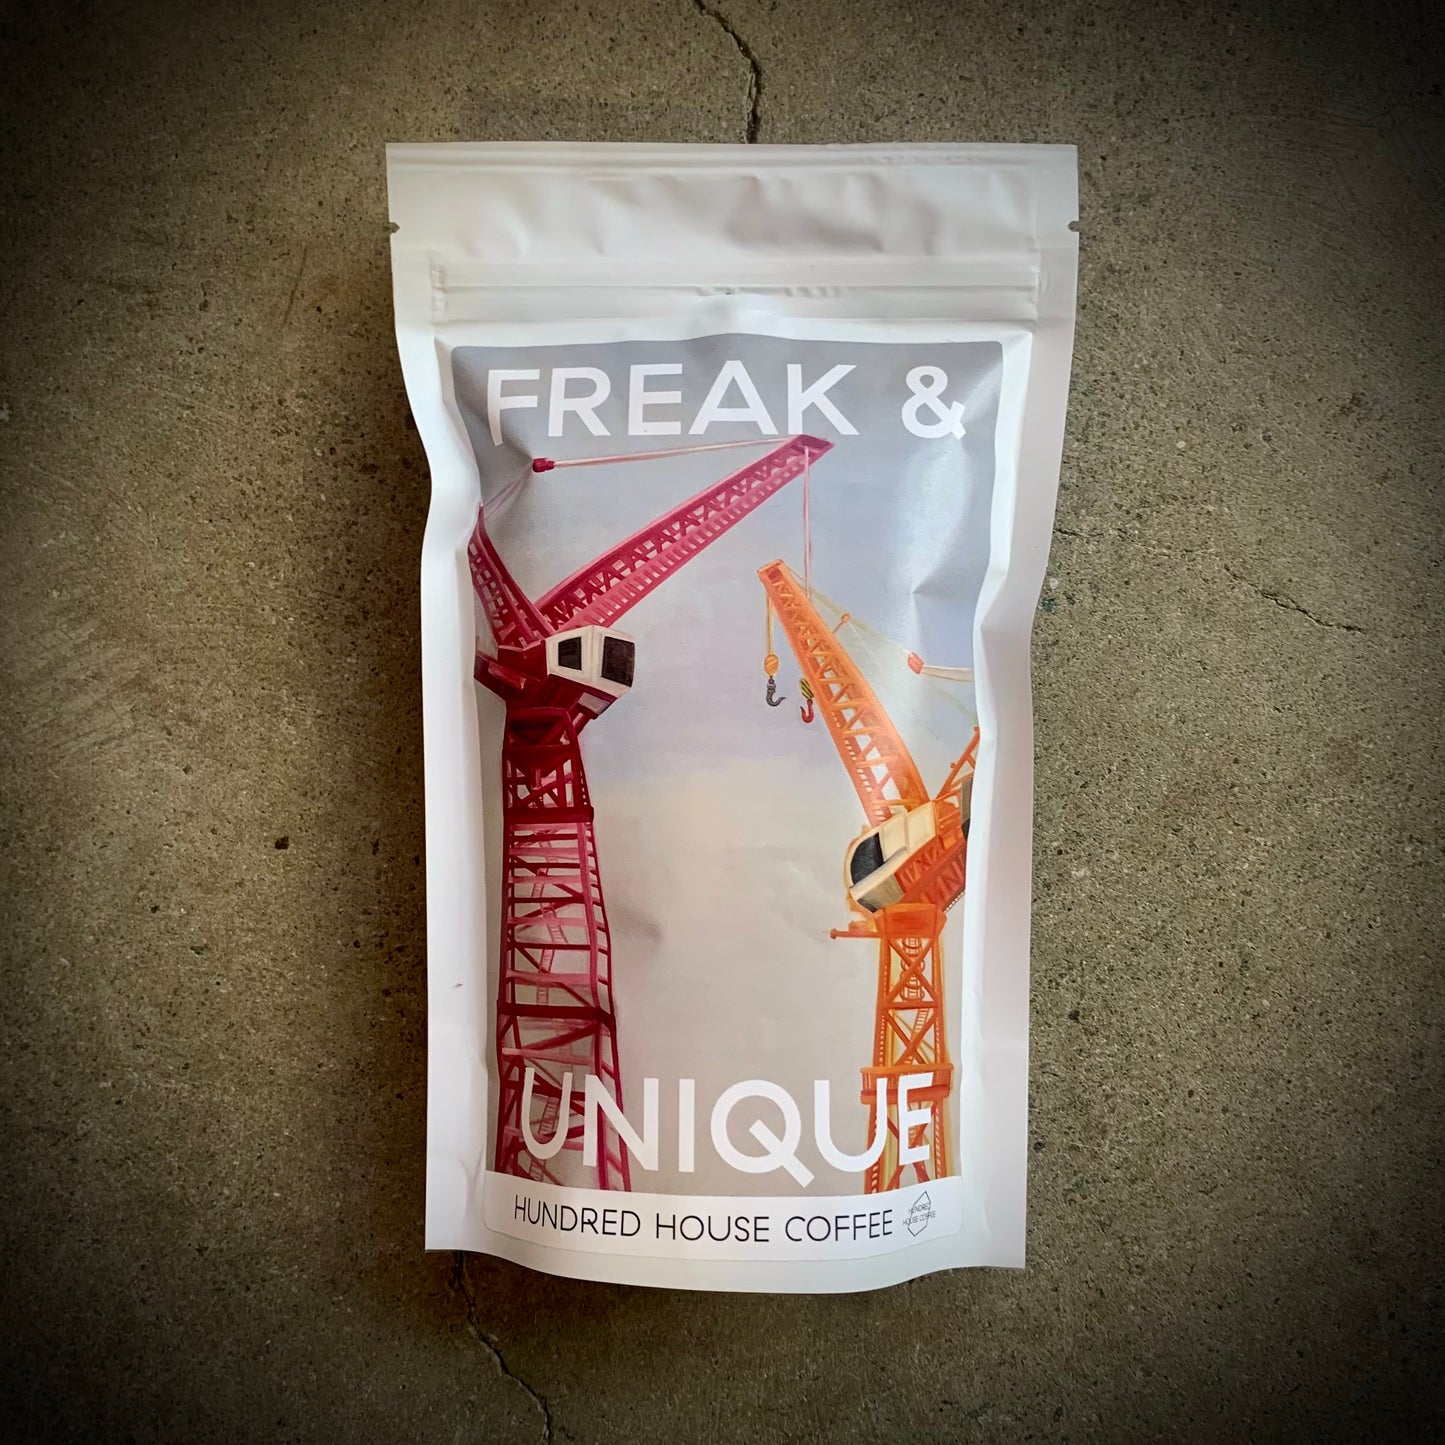 Hundred House Coffee, Freak & Unique XIII, A Rendezvous, Jairo Arcilla, Colombia - 150g